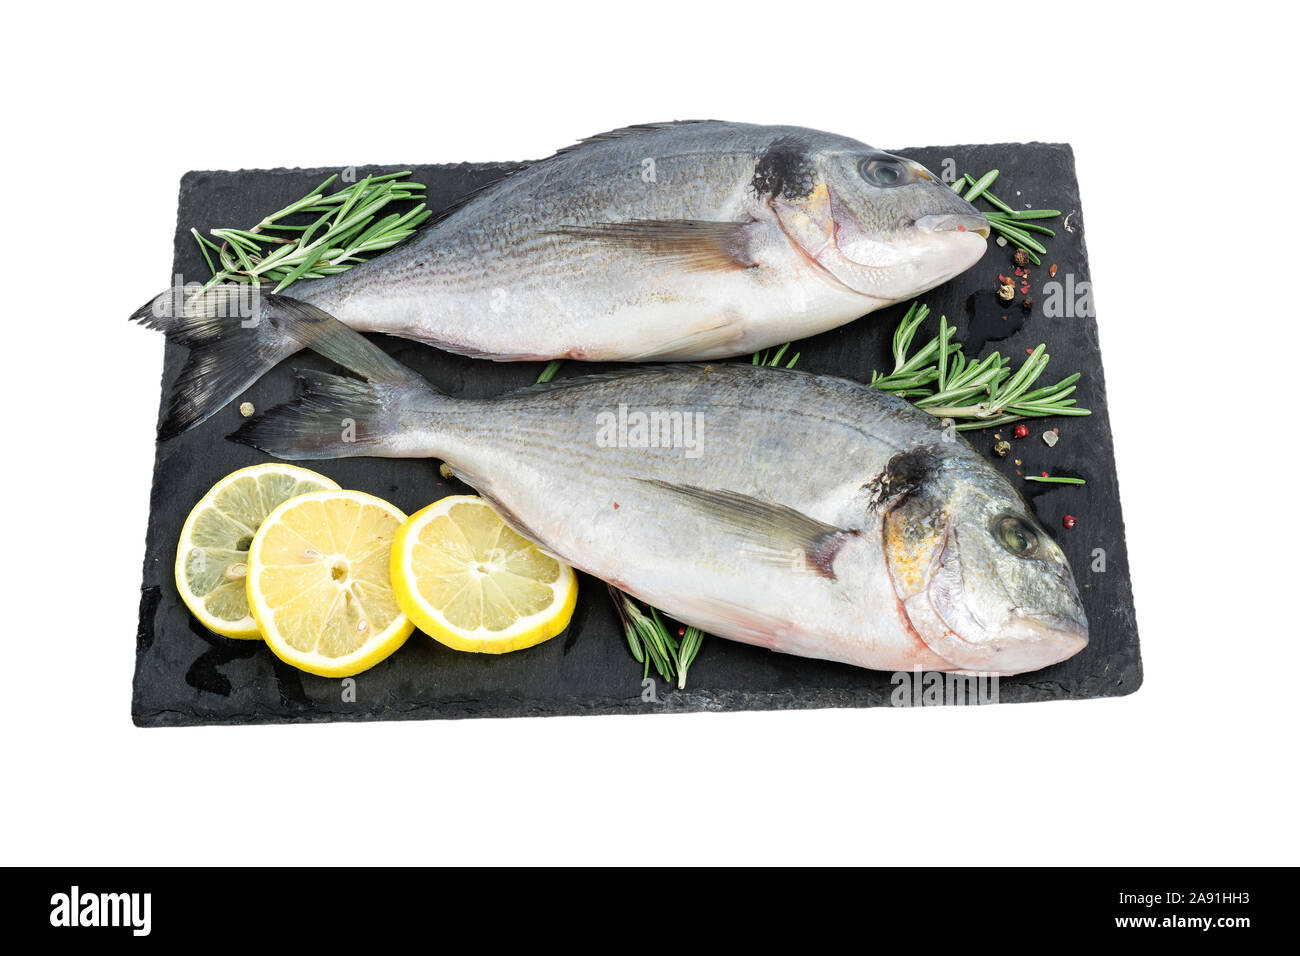 Fresh fish dorado or sea bream. Raw fish seabass with spices and herbs ingredients for cooking isolated on white background. healthy diet food Stock Photo